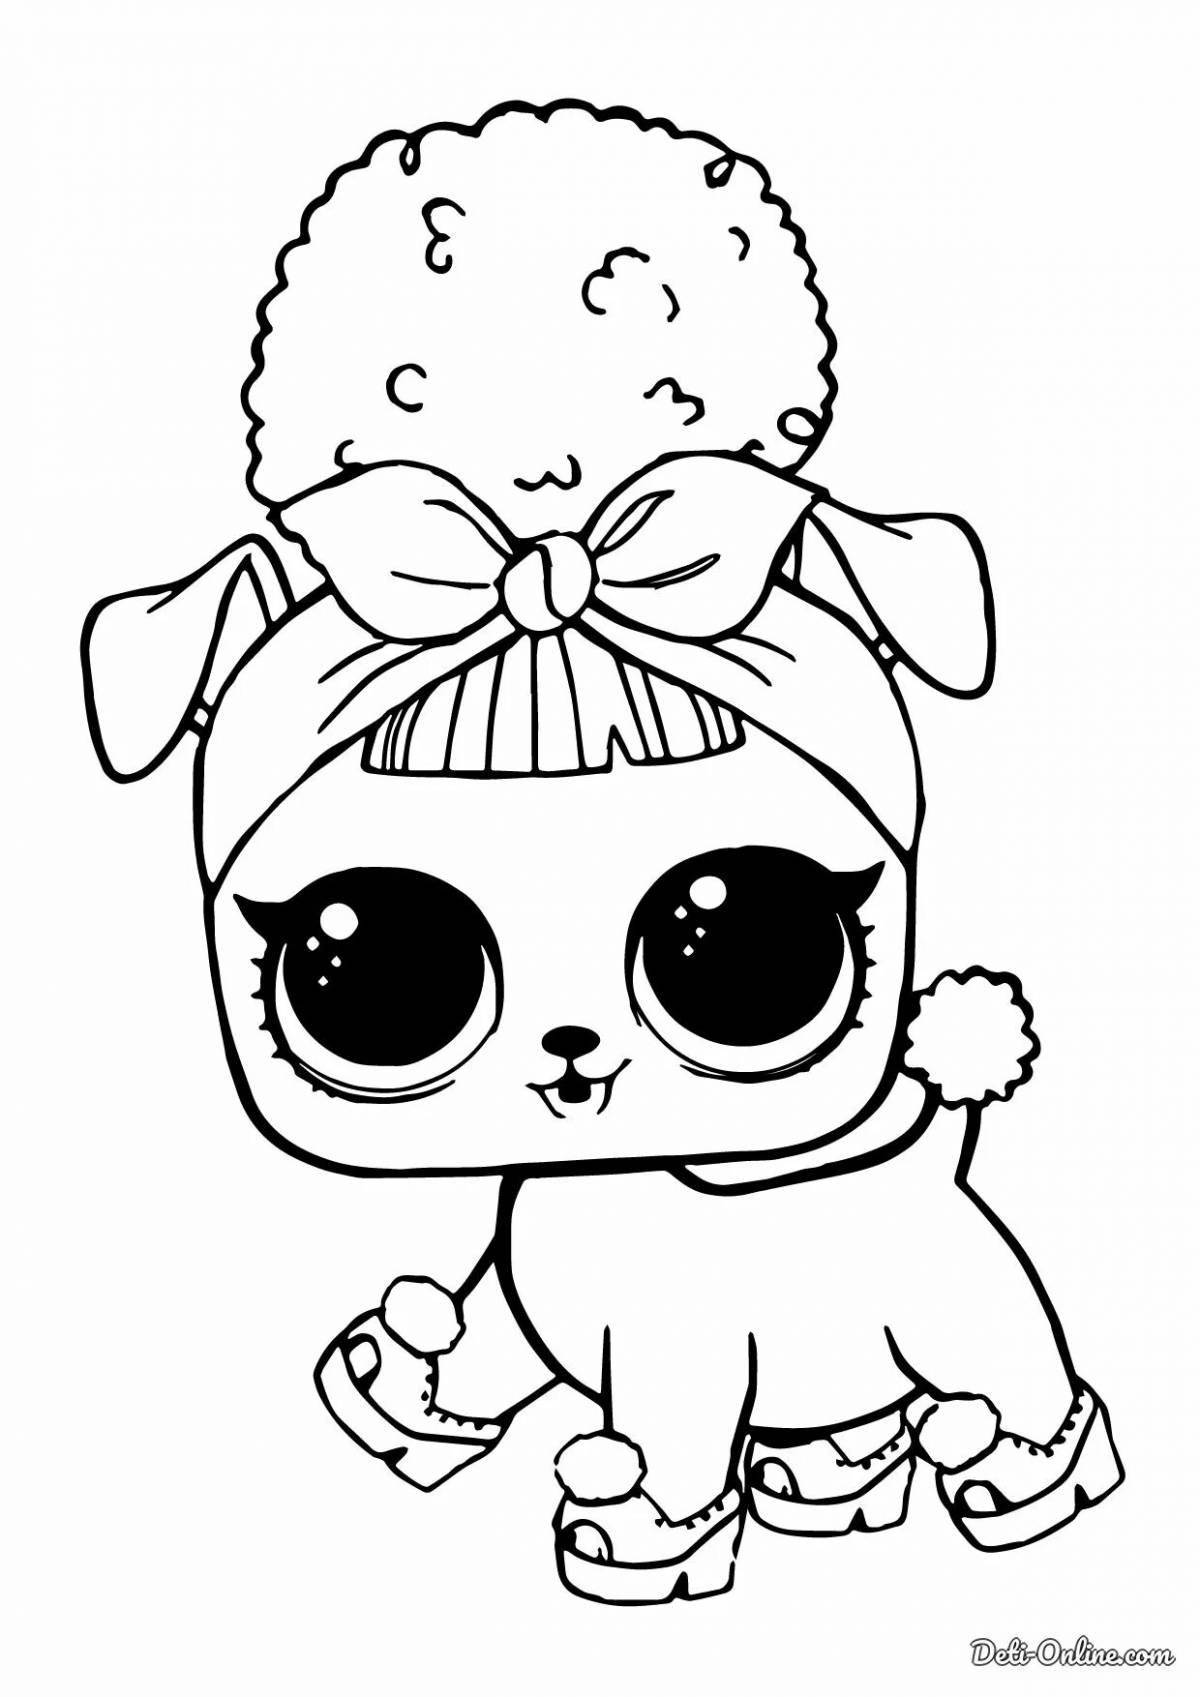 Awesome lolo pets coloring pages